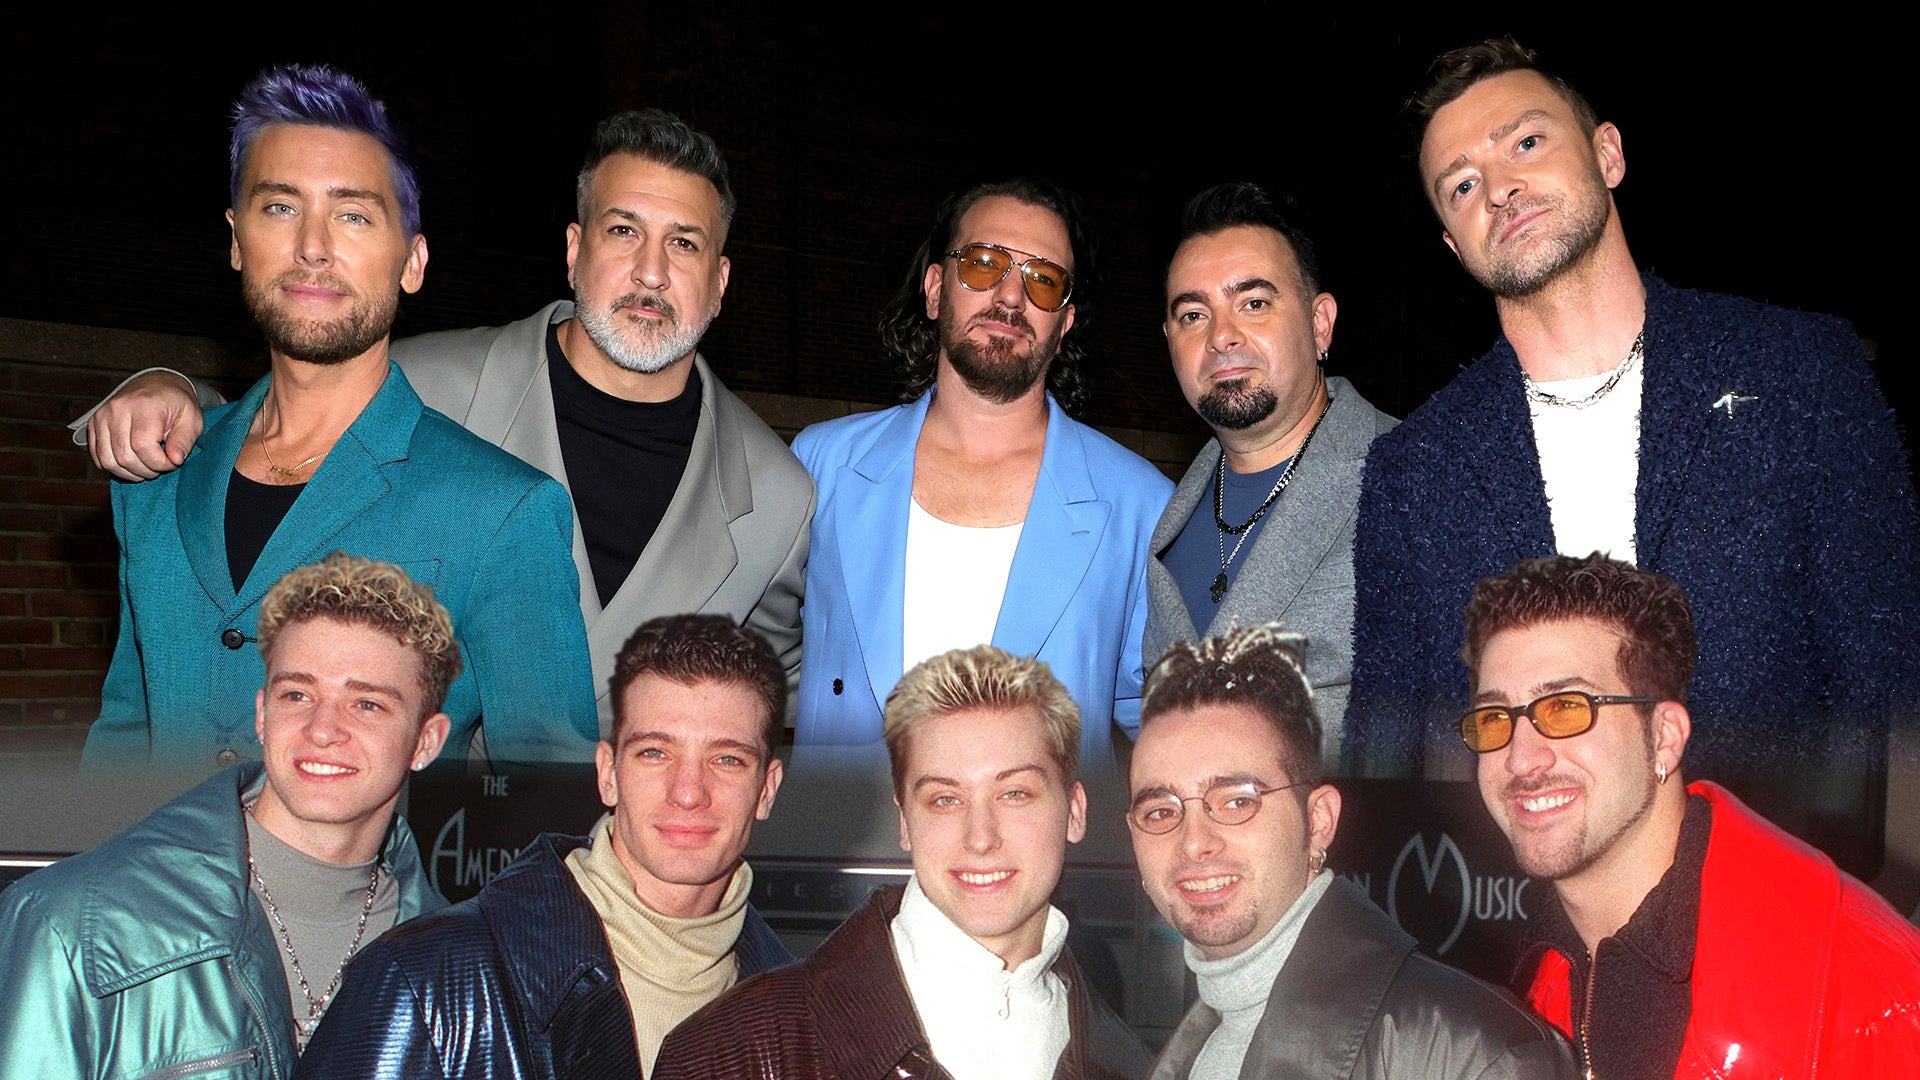 NSYNC Reunites in the Recording Studio! Preview Their First New Single in 22 Years